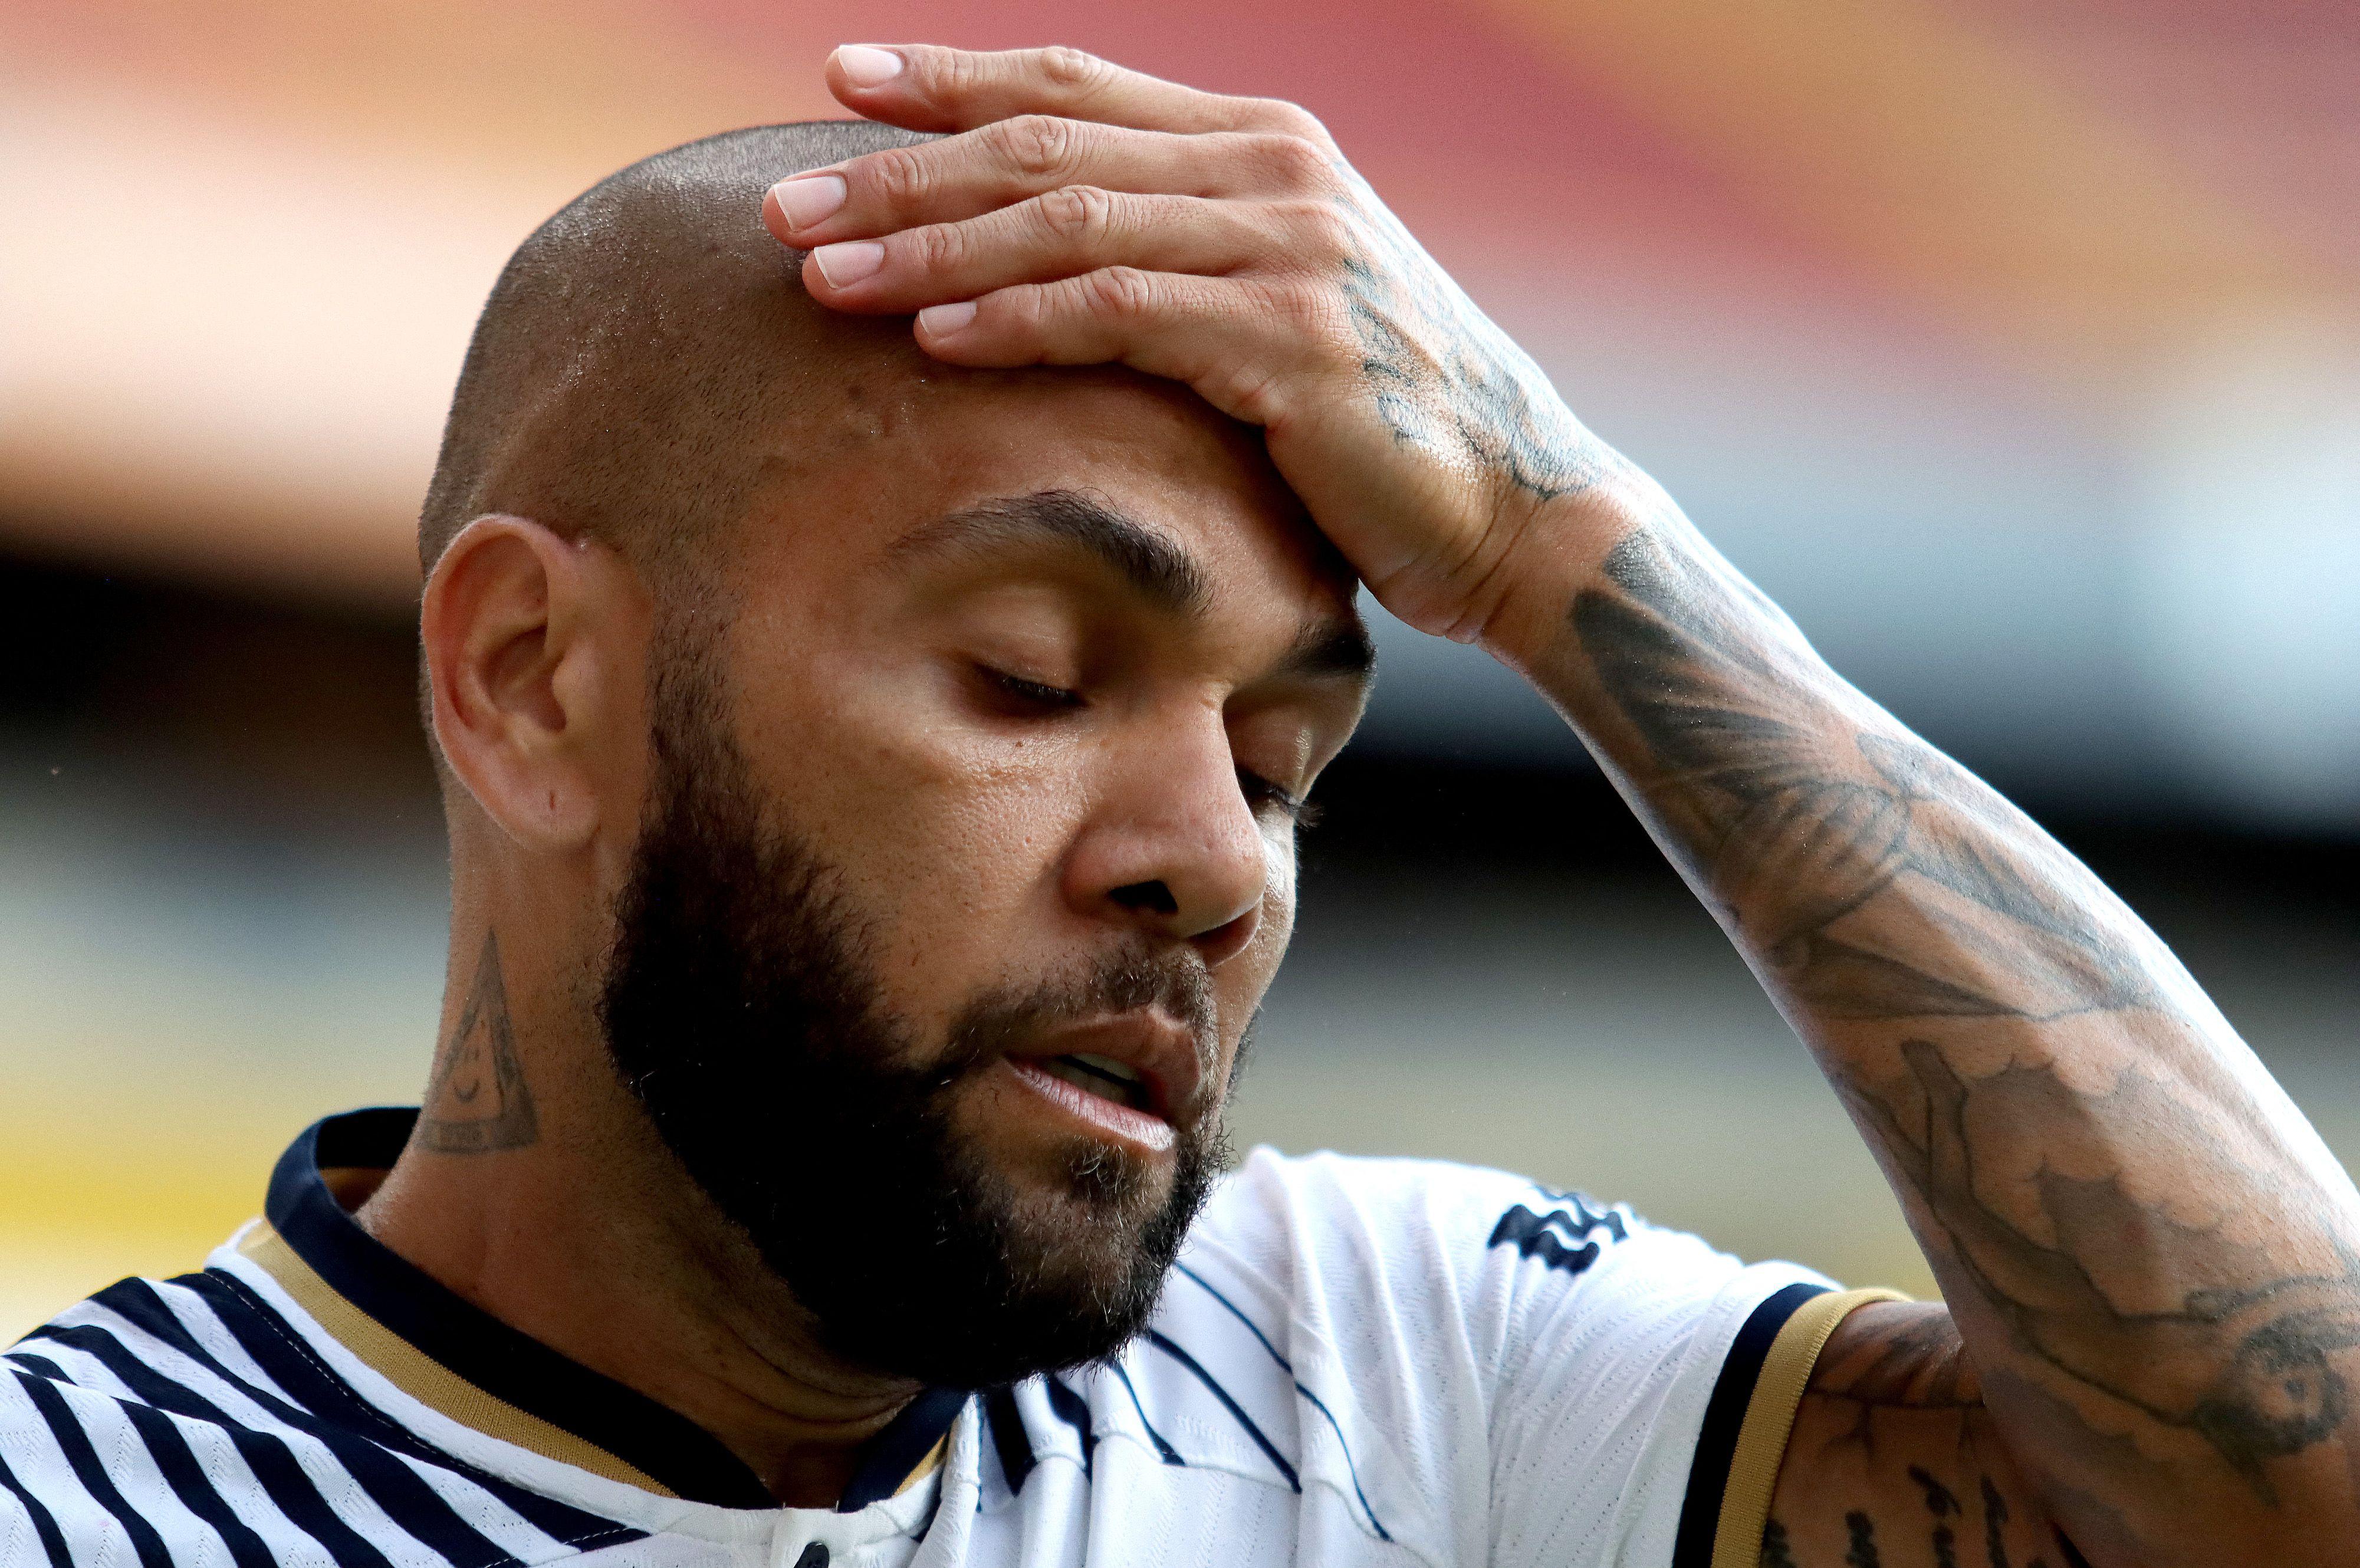 Dani Alves and Other Footballers Making News for Sexual Violence Allegations